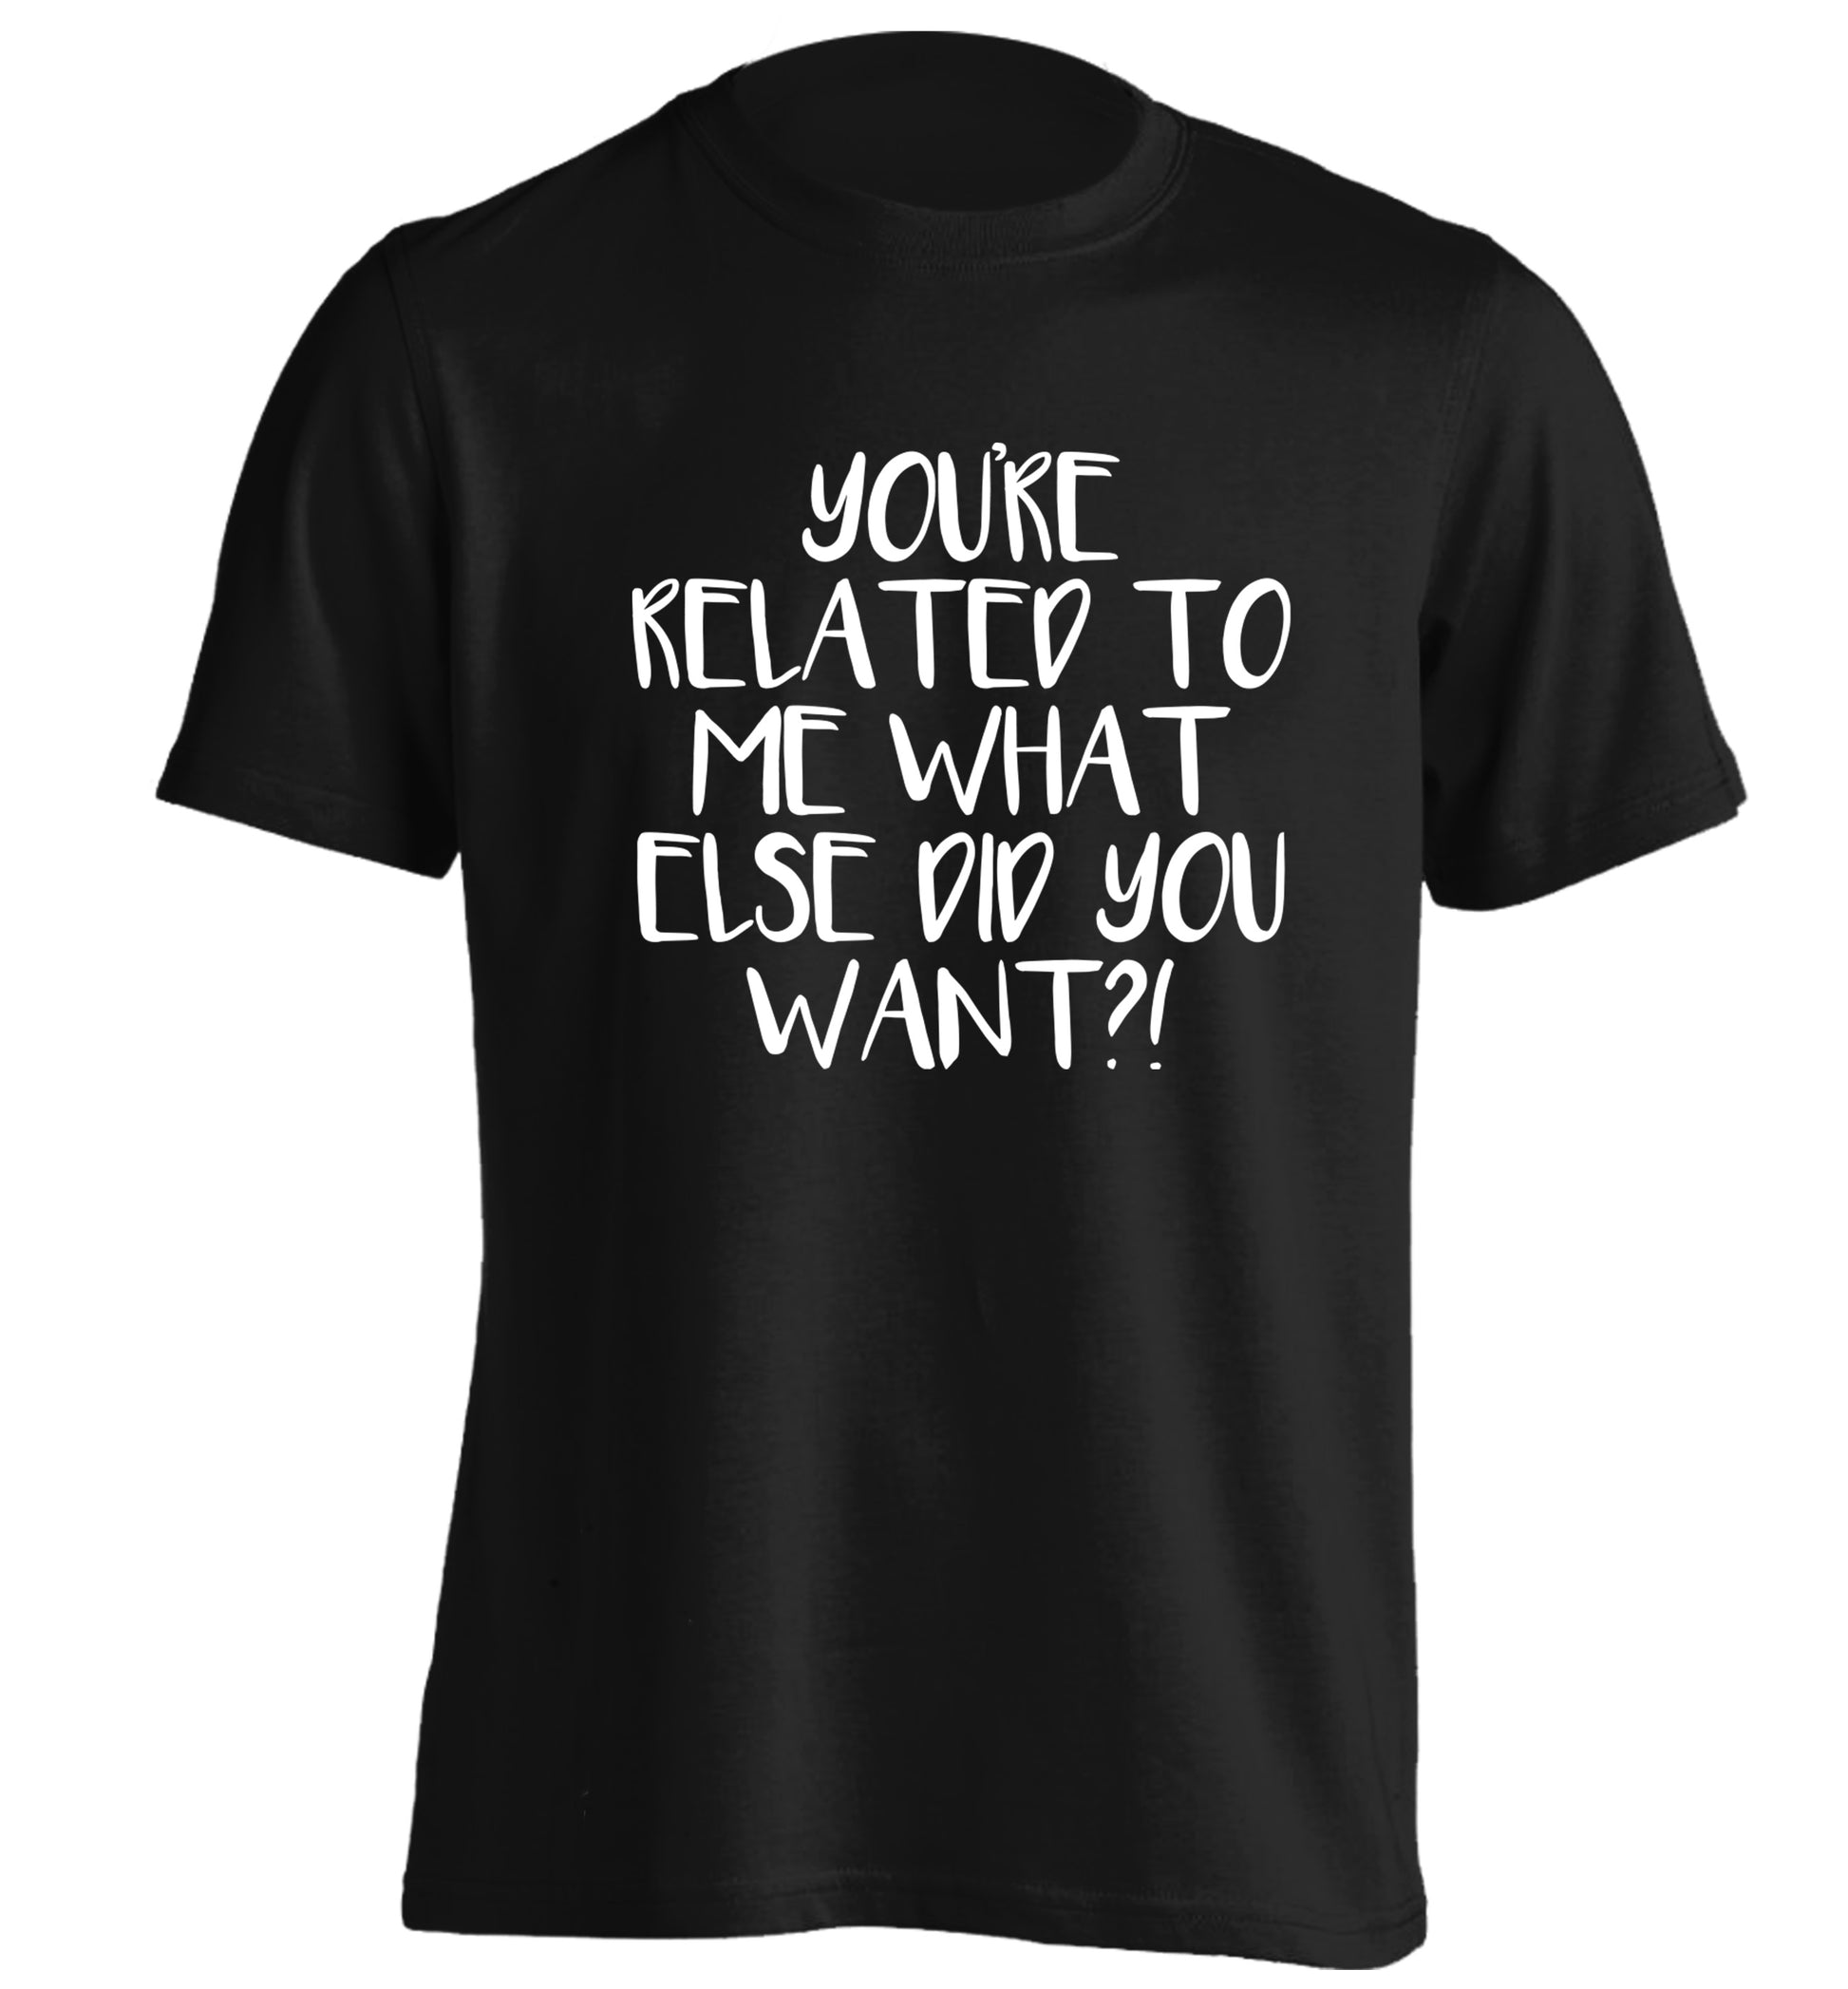 You're related to me what more do you want? adults unisex black Tshirt 2XL